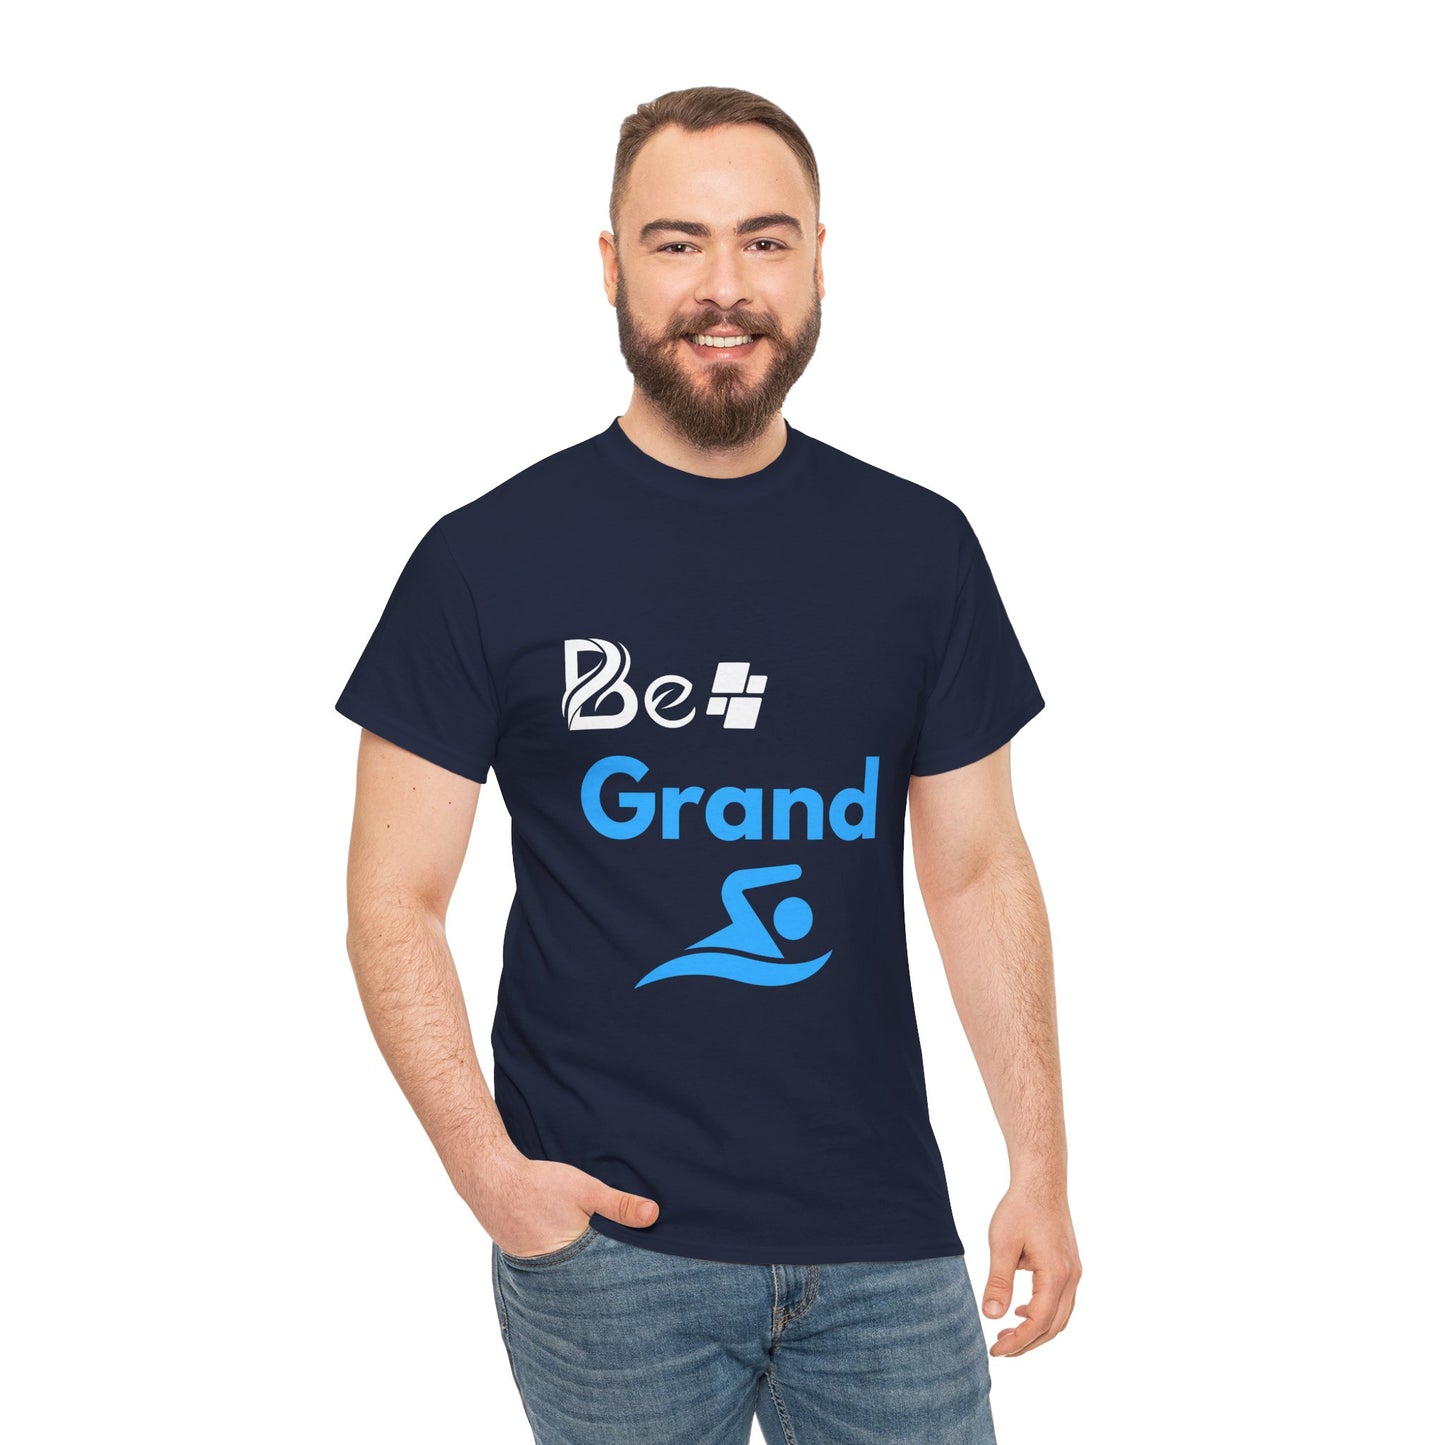 Be Grand Tee: Style, Comfort & Fun for Everyone - BeinCart